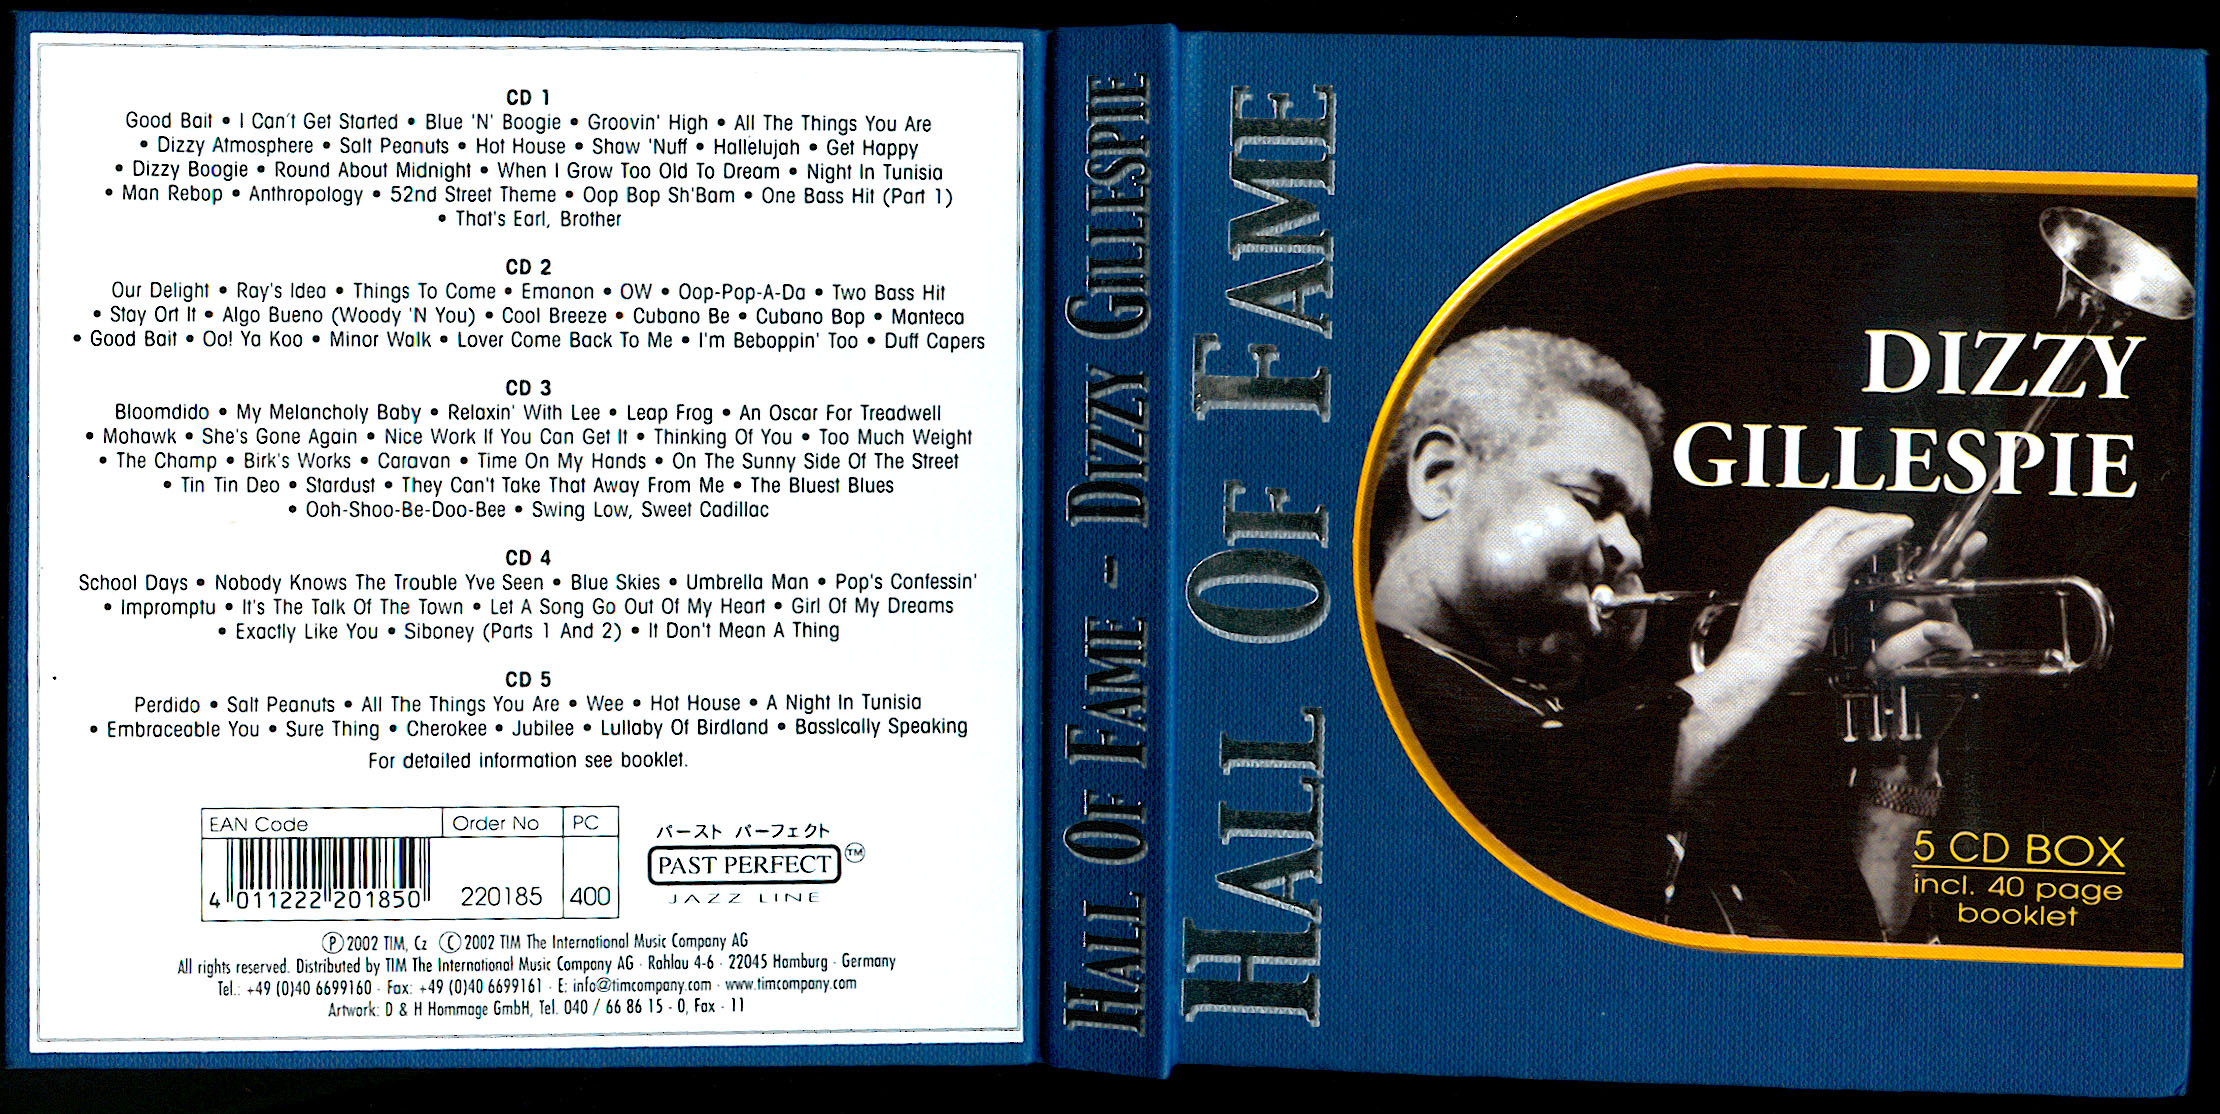 Hall of fame - Cover.jpg